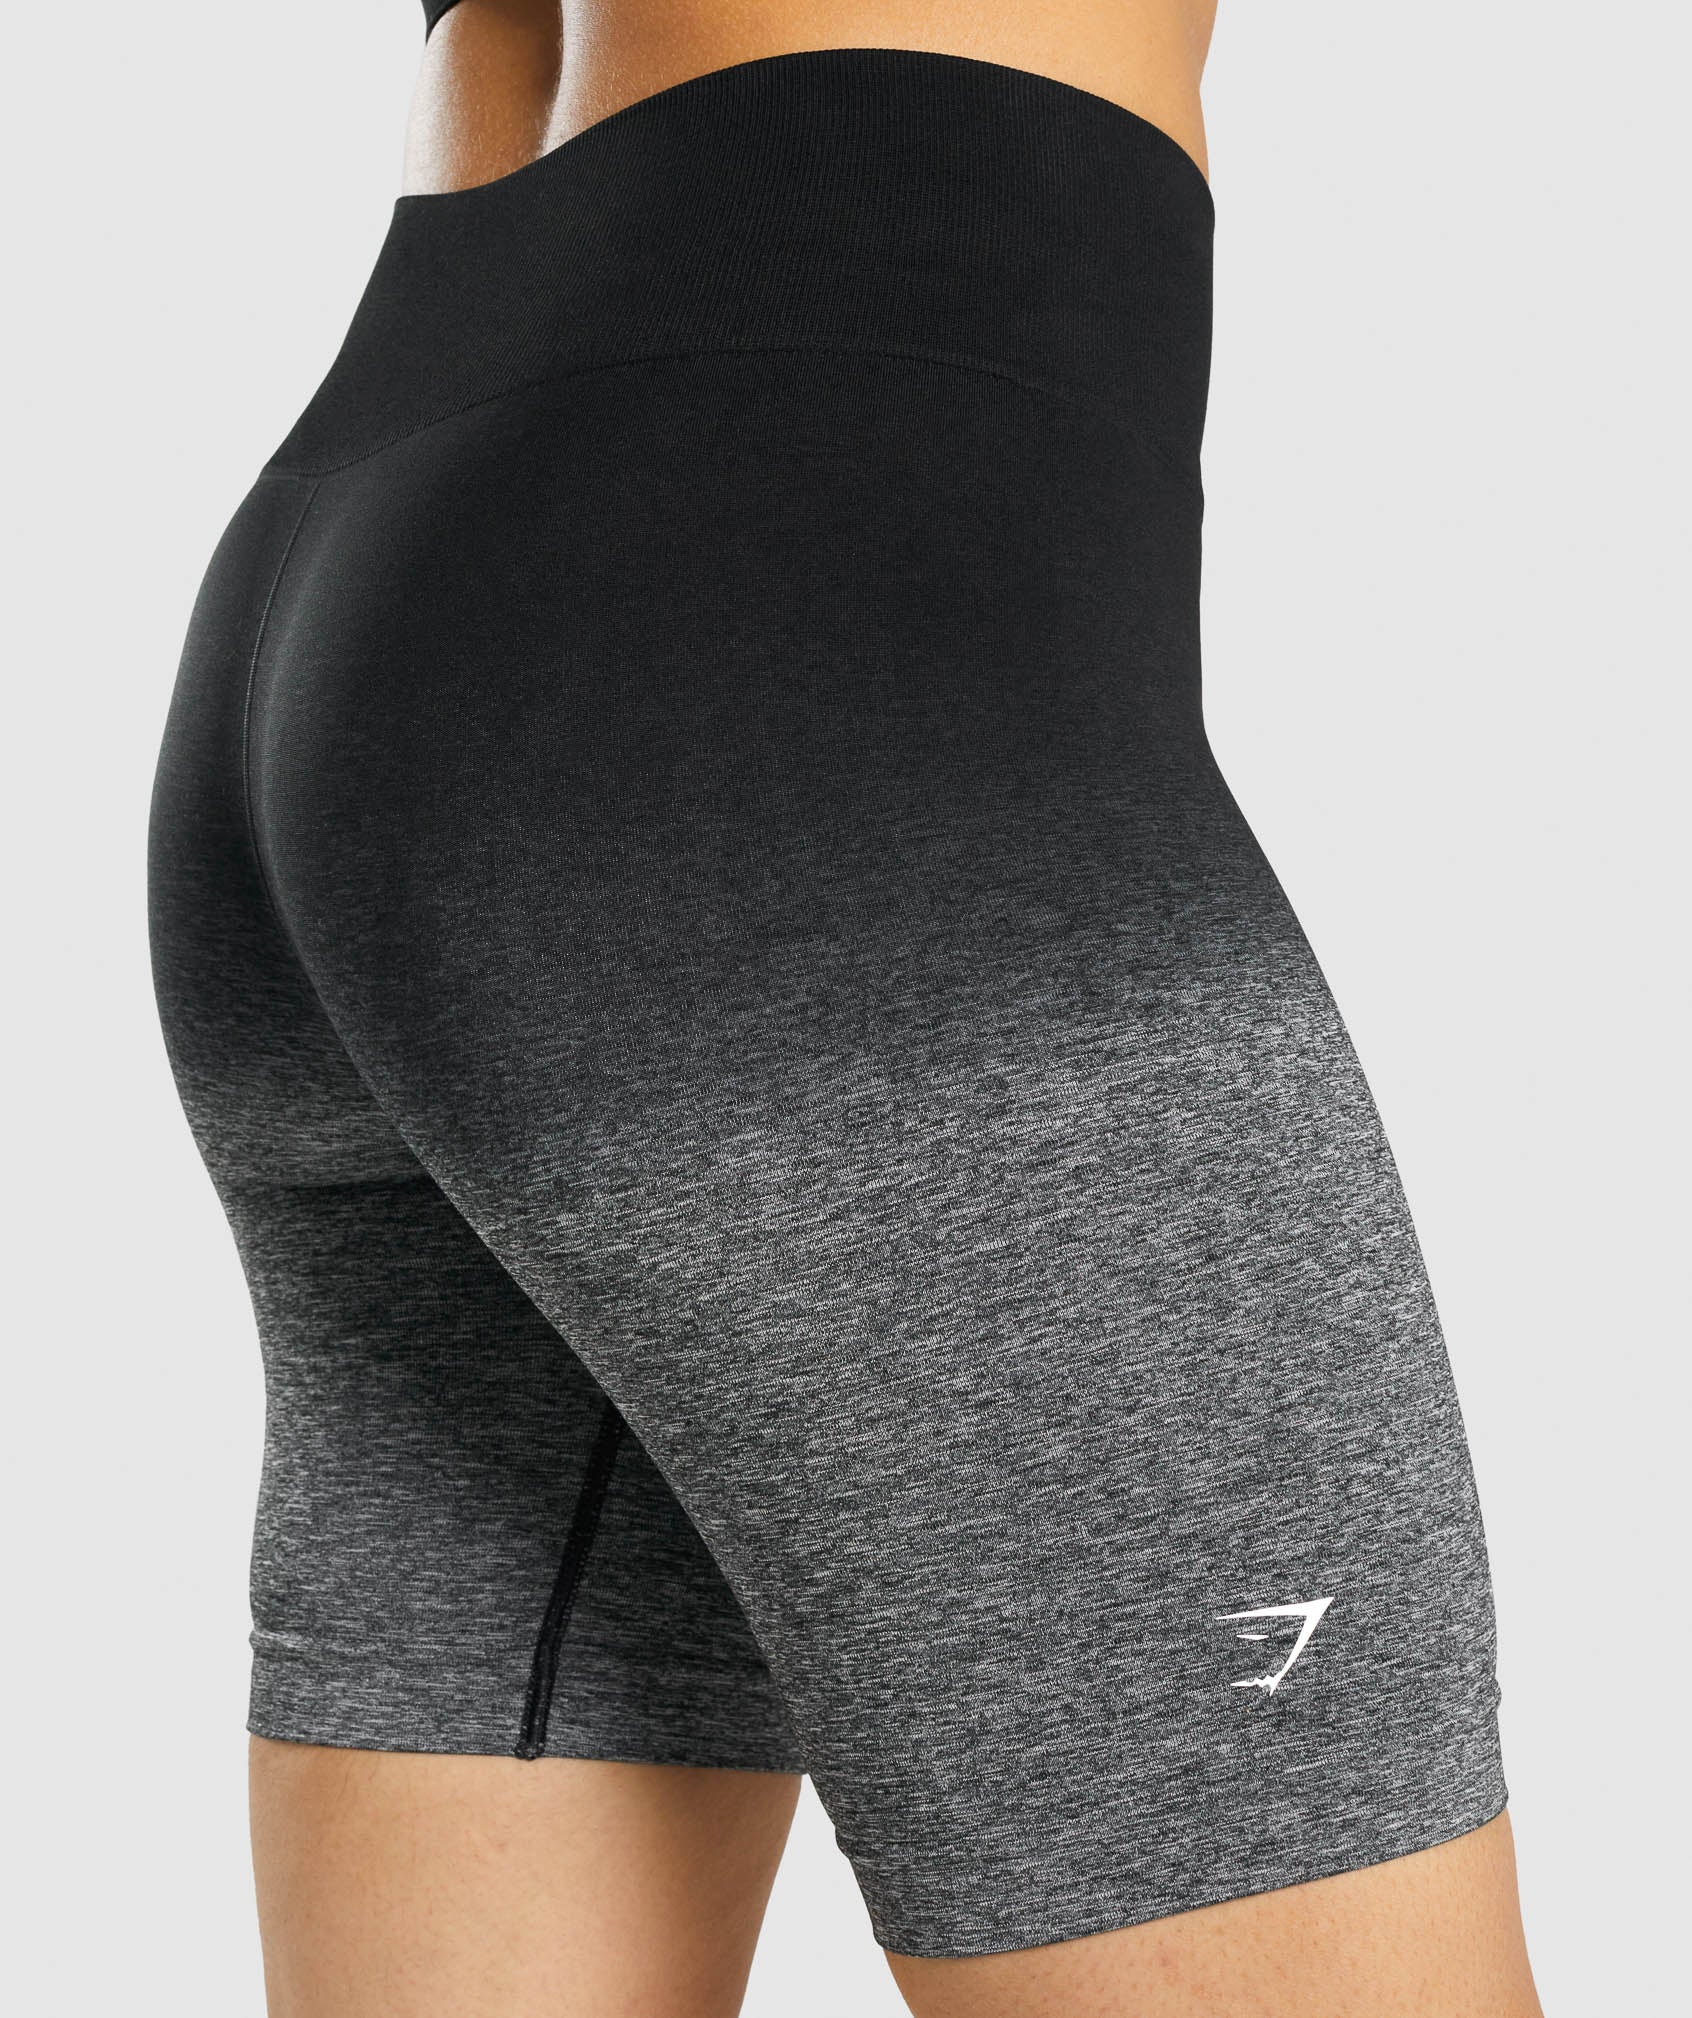 17$ GYMSHARK Seamless Ombre on ALIEXPRESS  Trying all colors and size S-L  